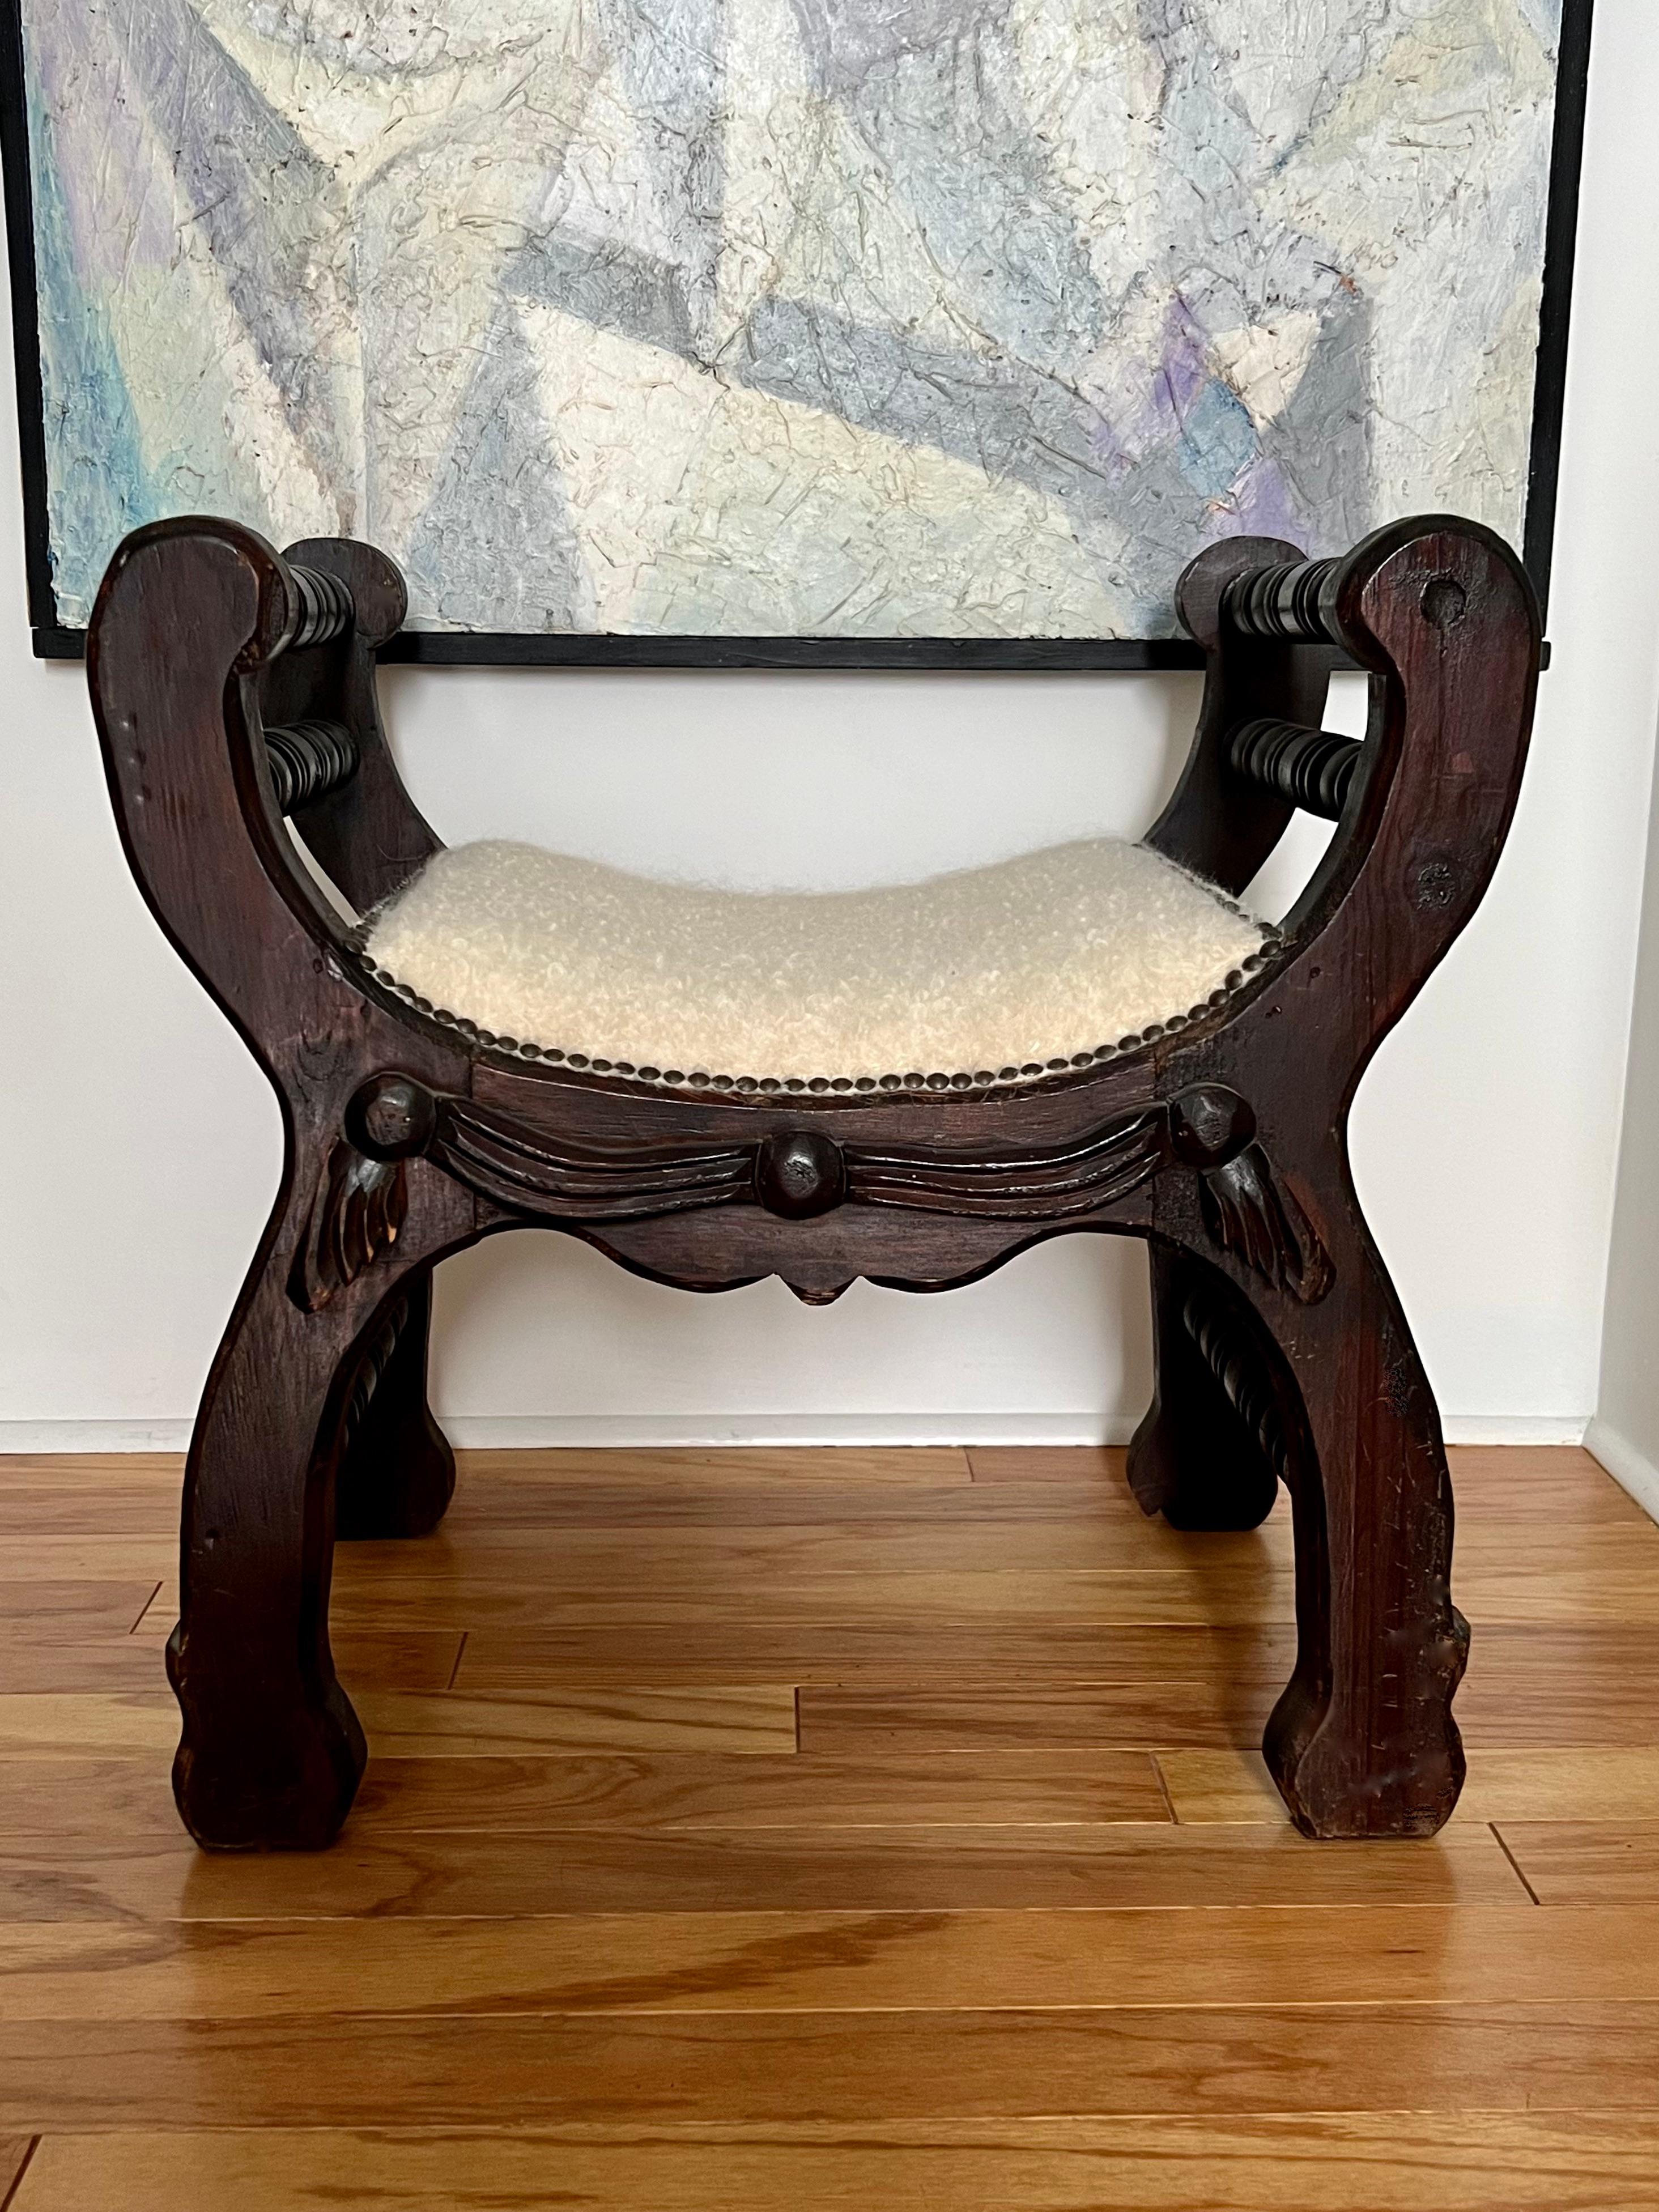 Mexican rustic carved wood bench with spool-turned crossbars. Newly upholstered in La Maison Pierre Frey's most luxurious boucle, Louison Creme, which sells for over $700 a yard. The bench features the original dark brown finish, now distressed